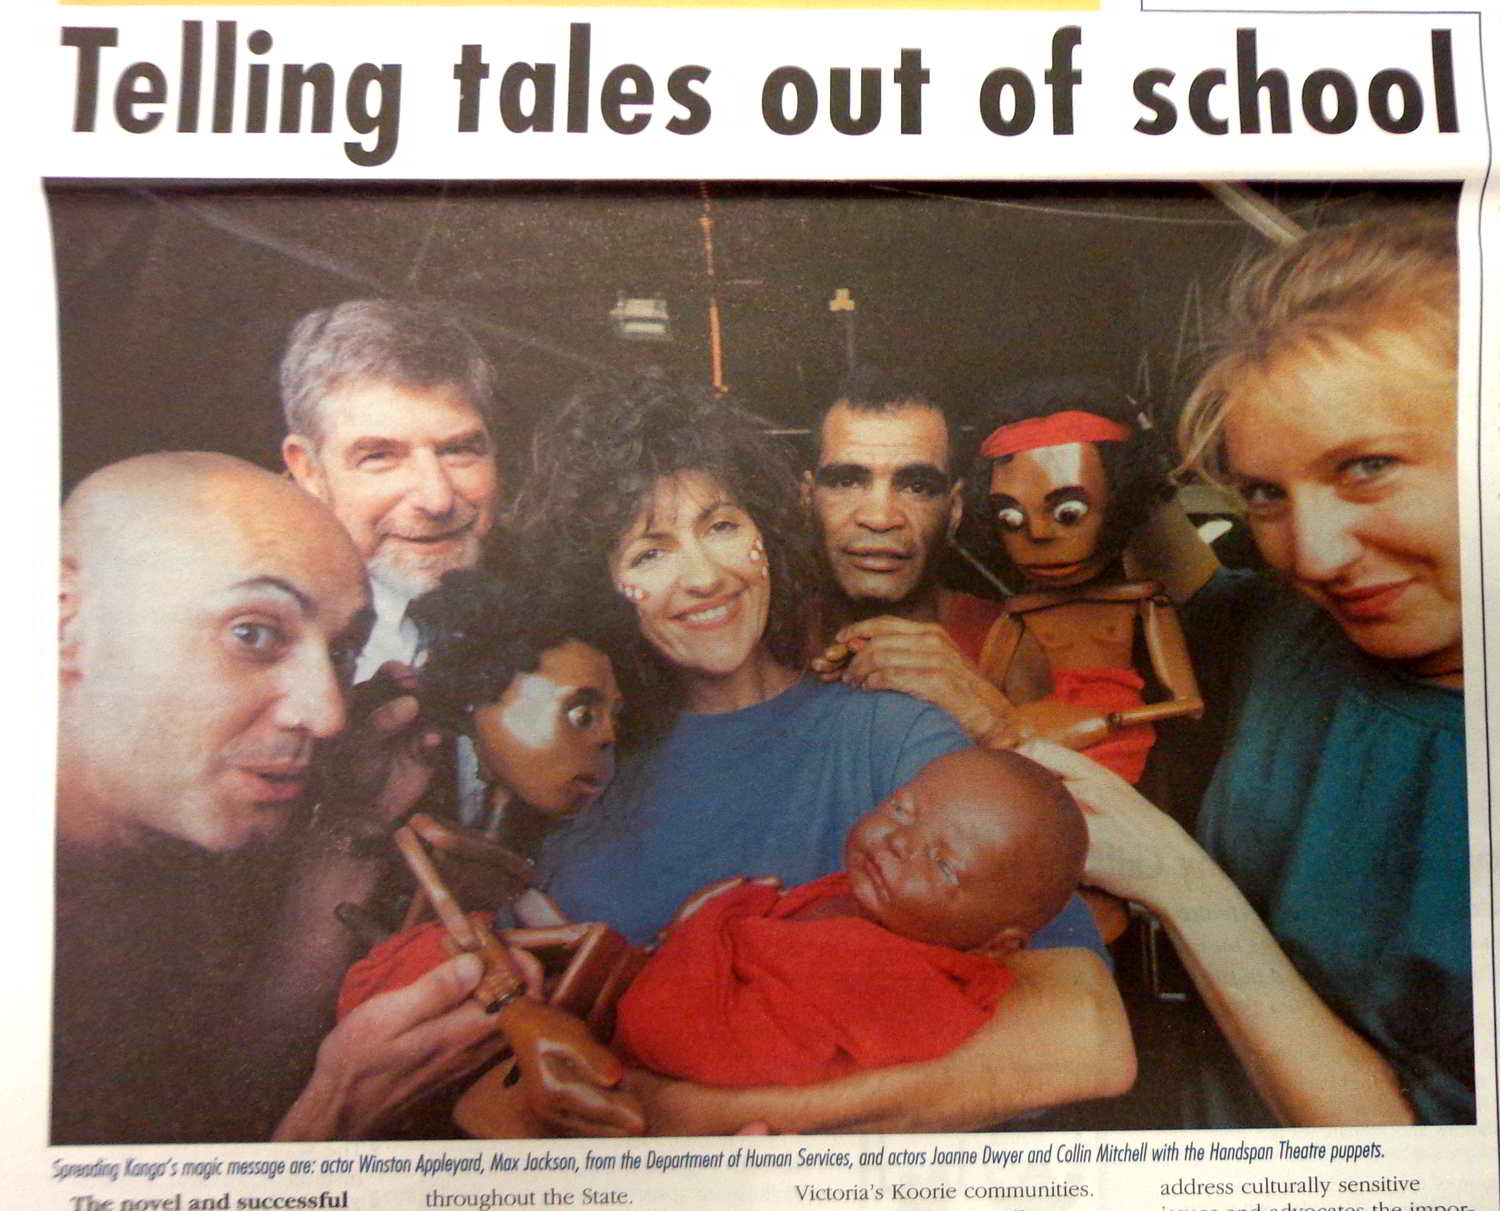 TIE with Koori Health Victoria newspaper clipping of mixed indigenous and anglo-australian cast and puppets